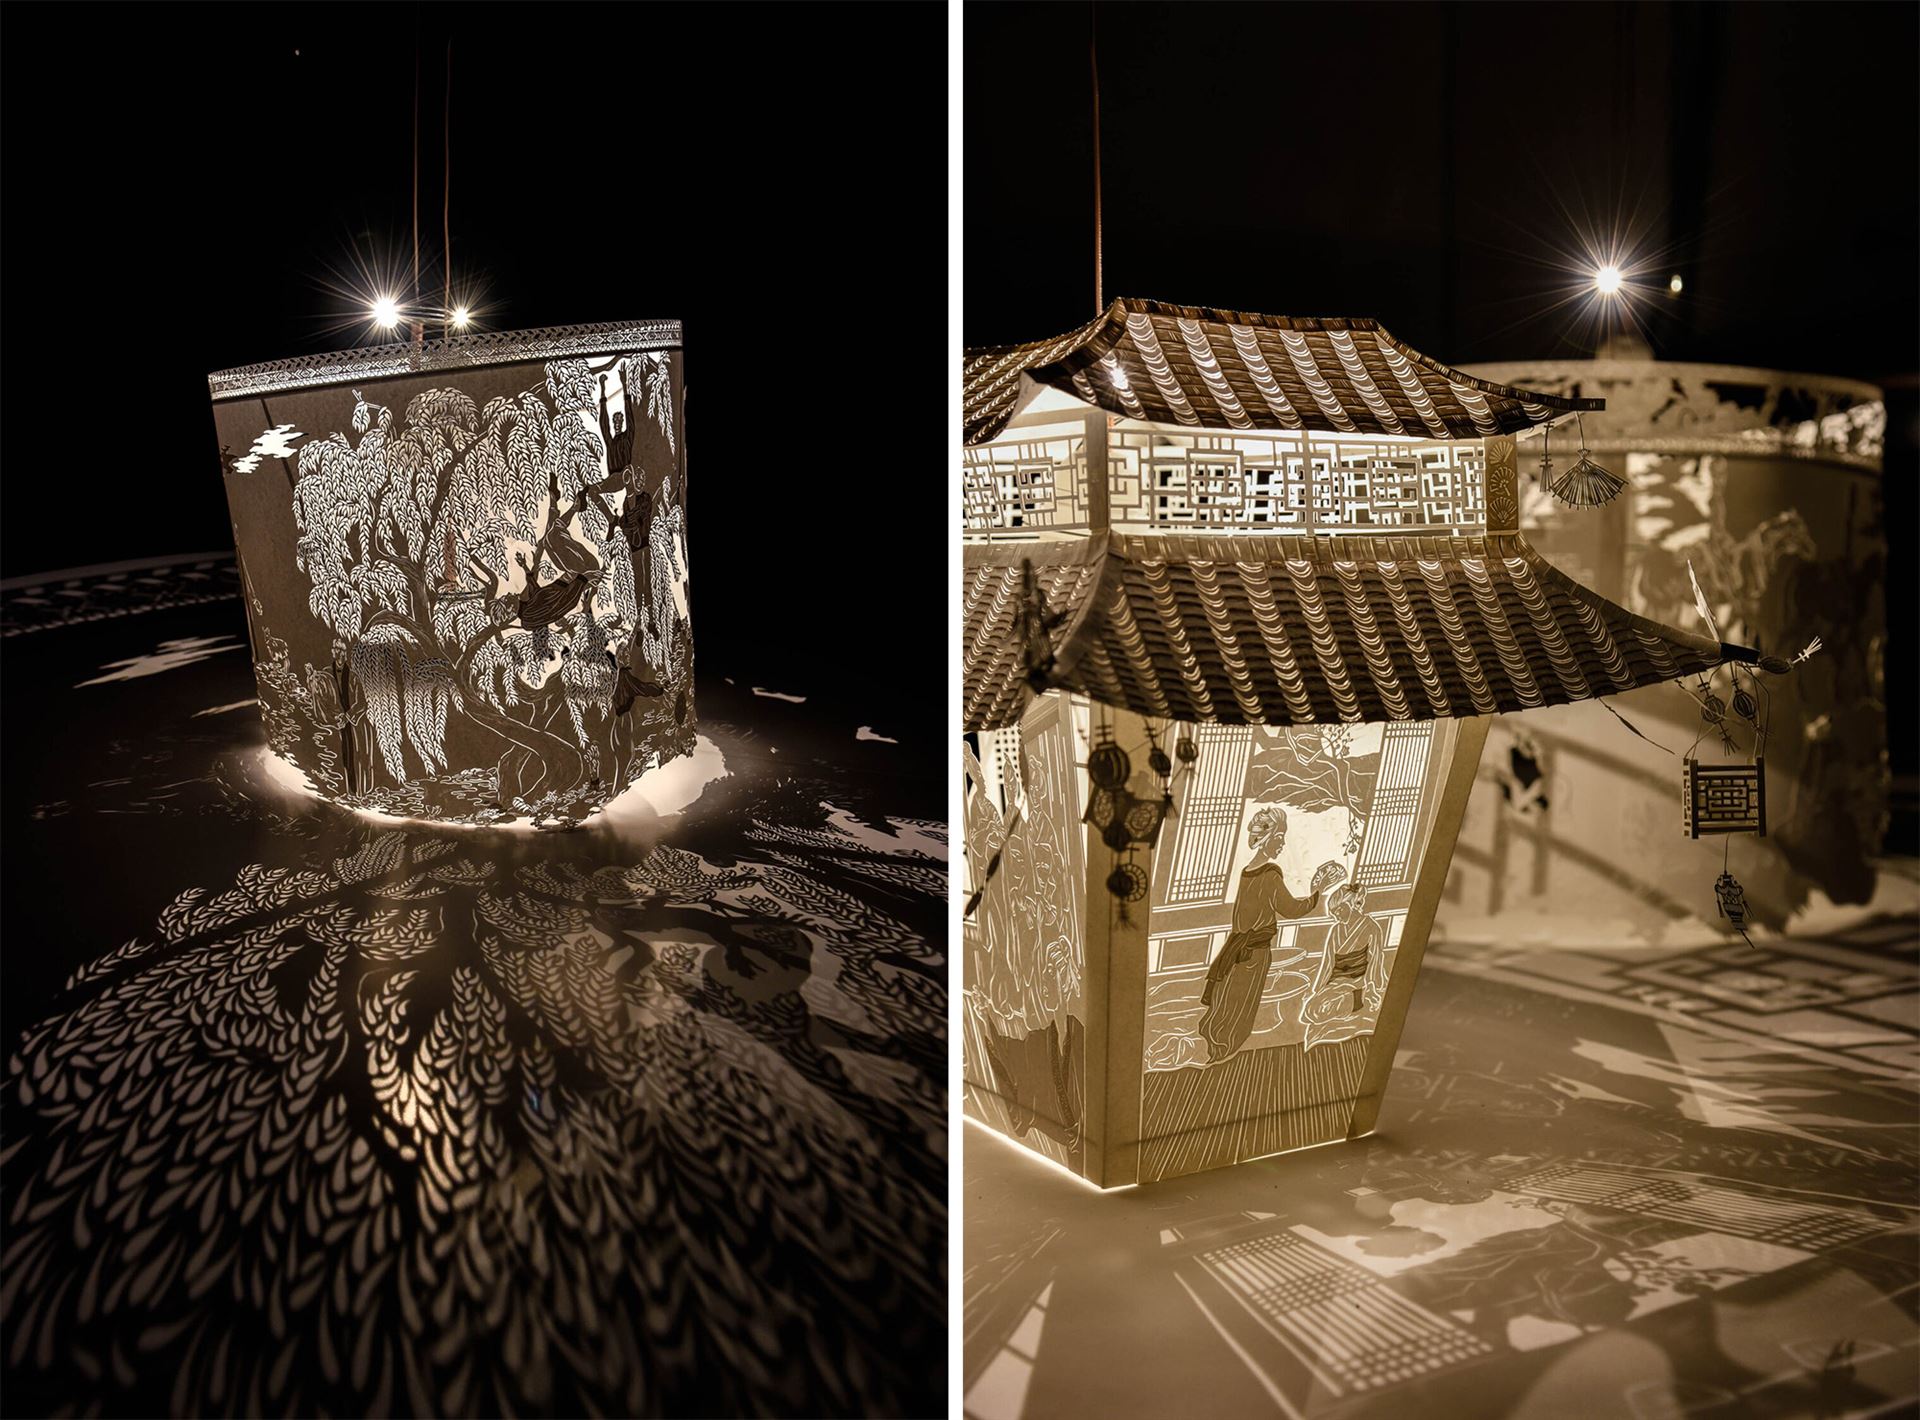 Two images of an architectural sculpture made of paper, illuminated from within.